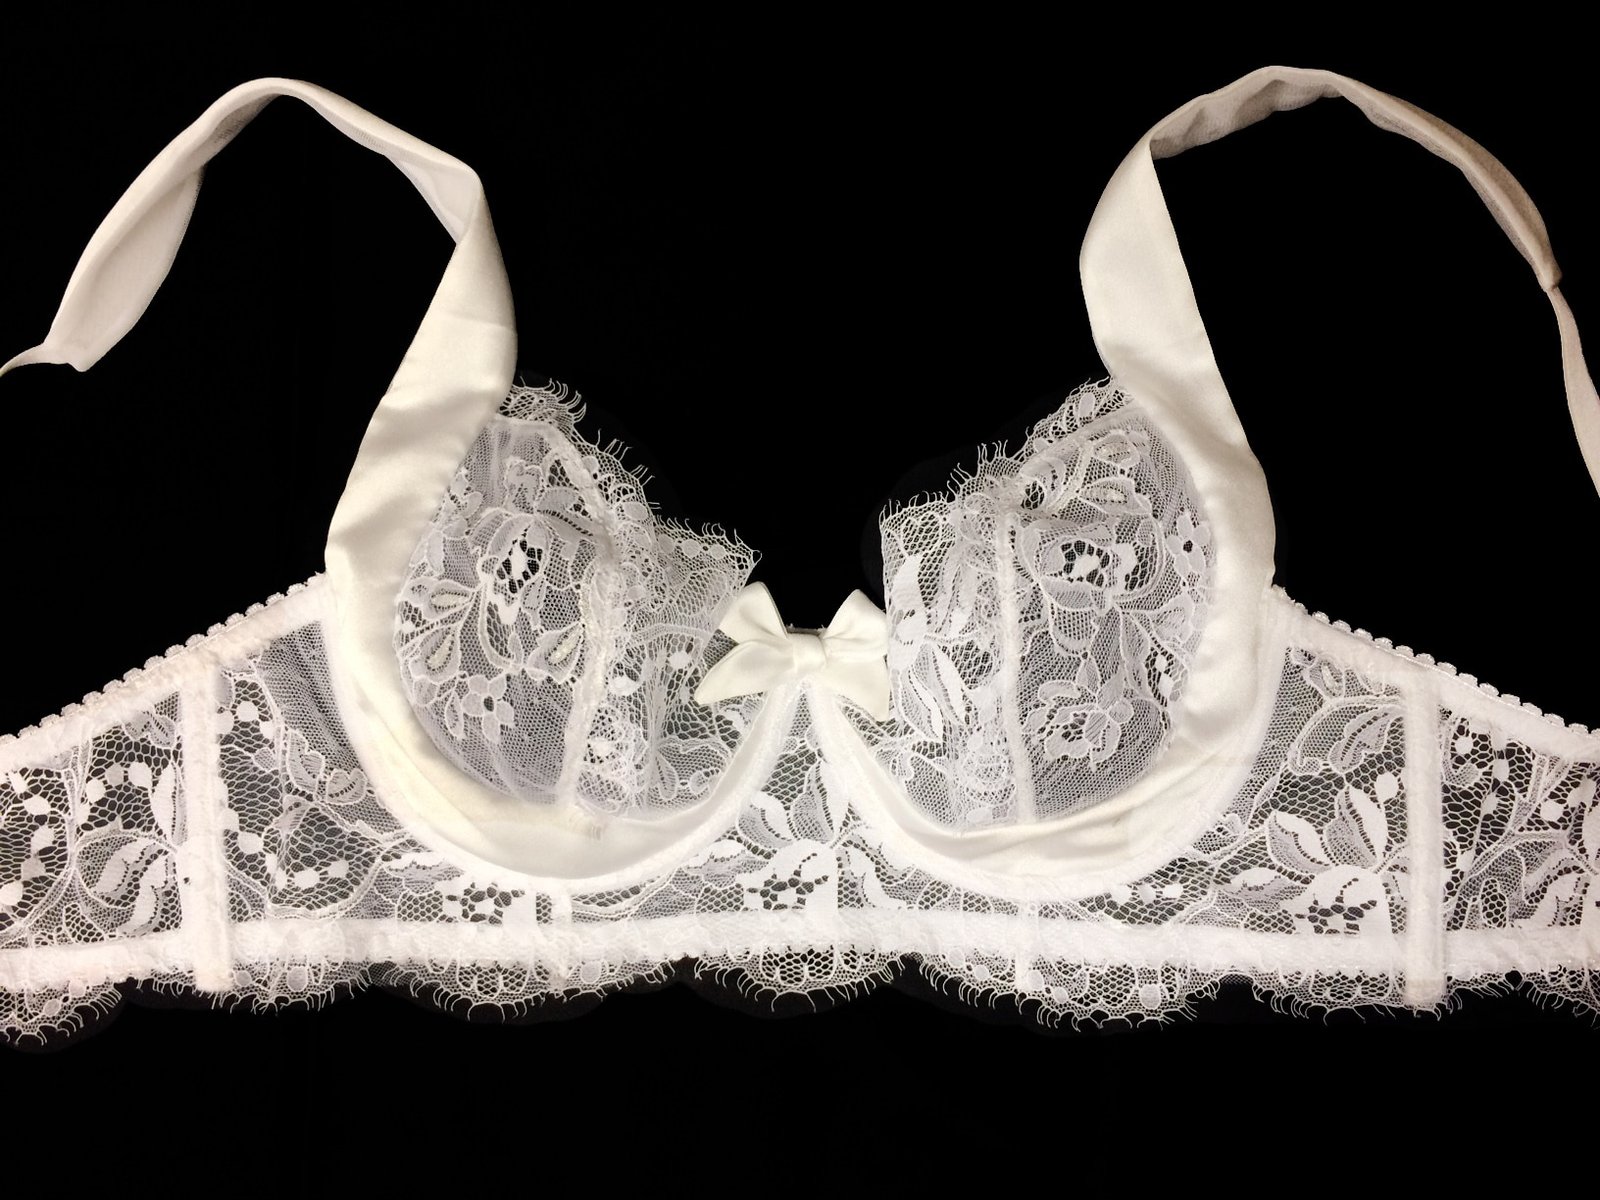 White Sheer Nylon Chiffon BRA with Lace - available in all COLORS